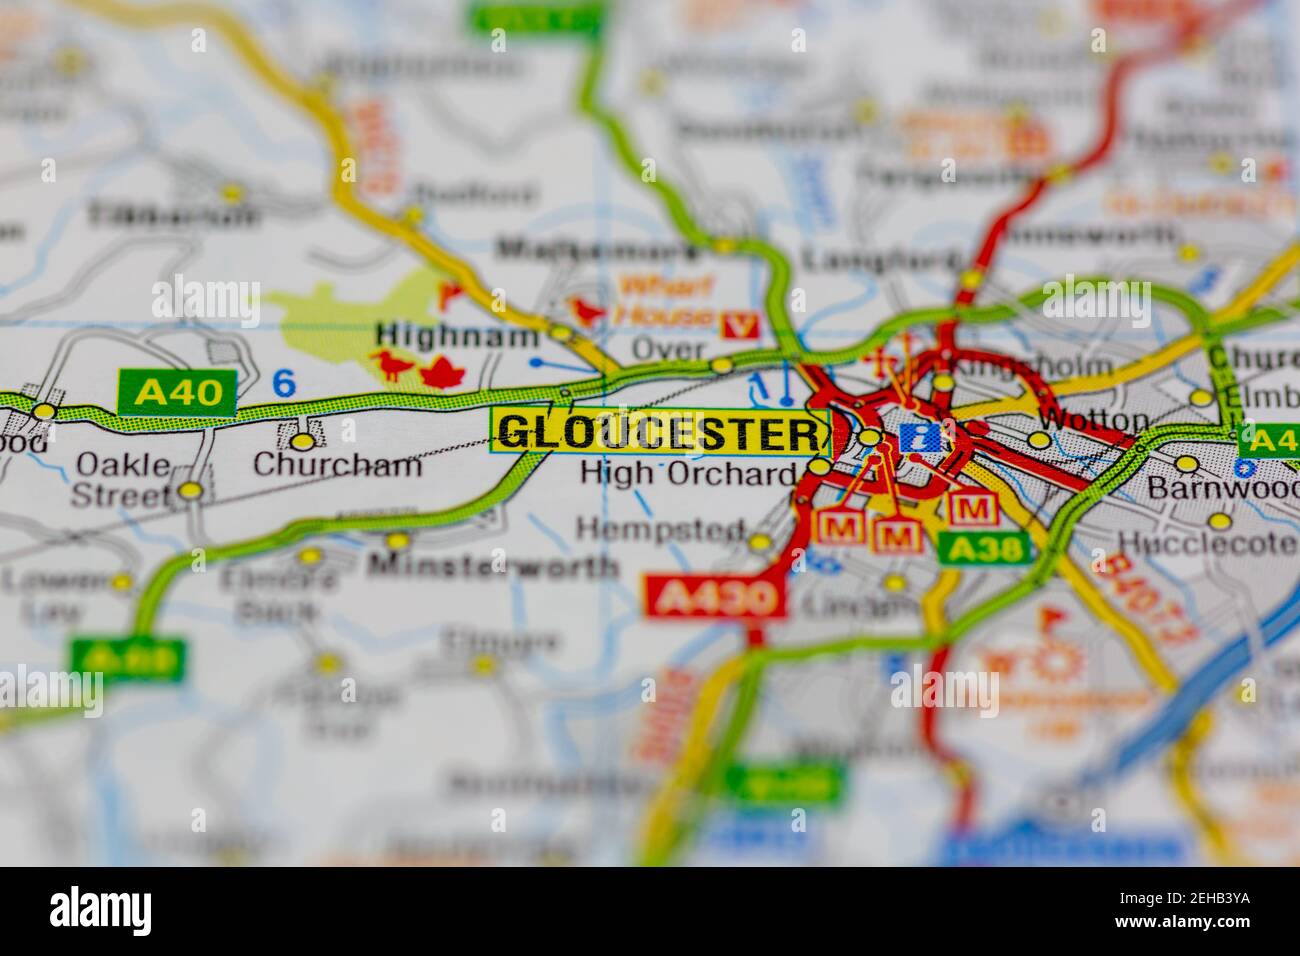 Gloucester and surrounding areas shown on a road map or Geography map Stock Photo